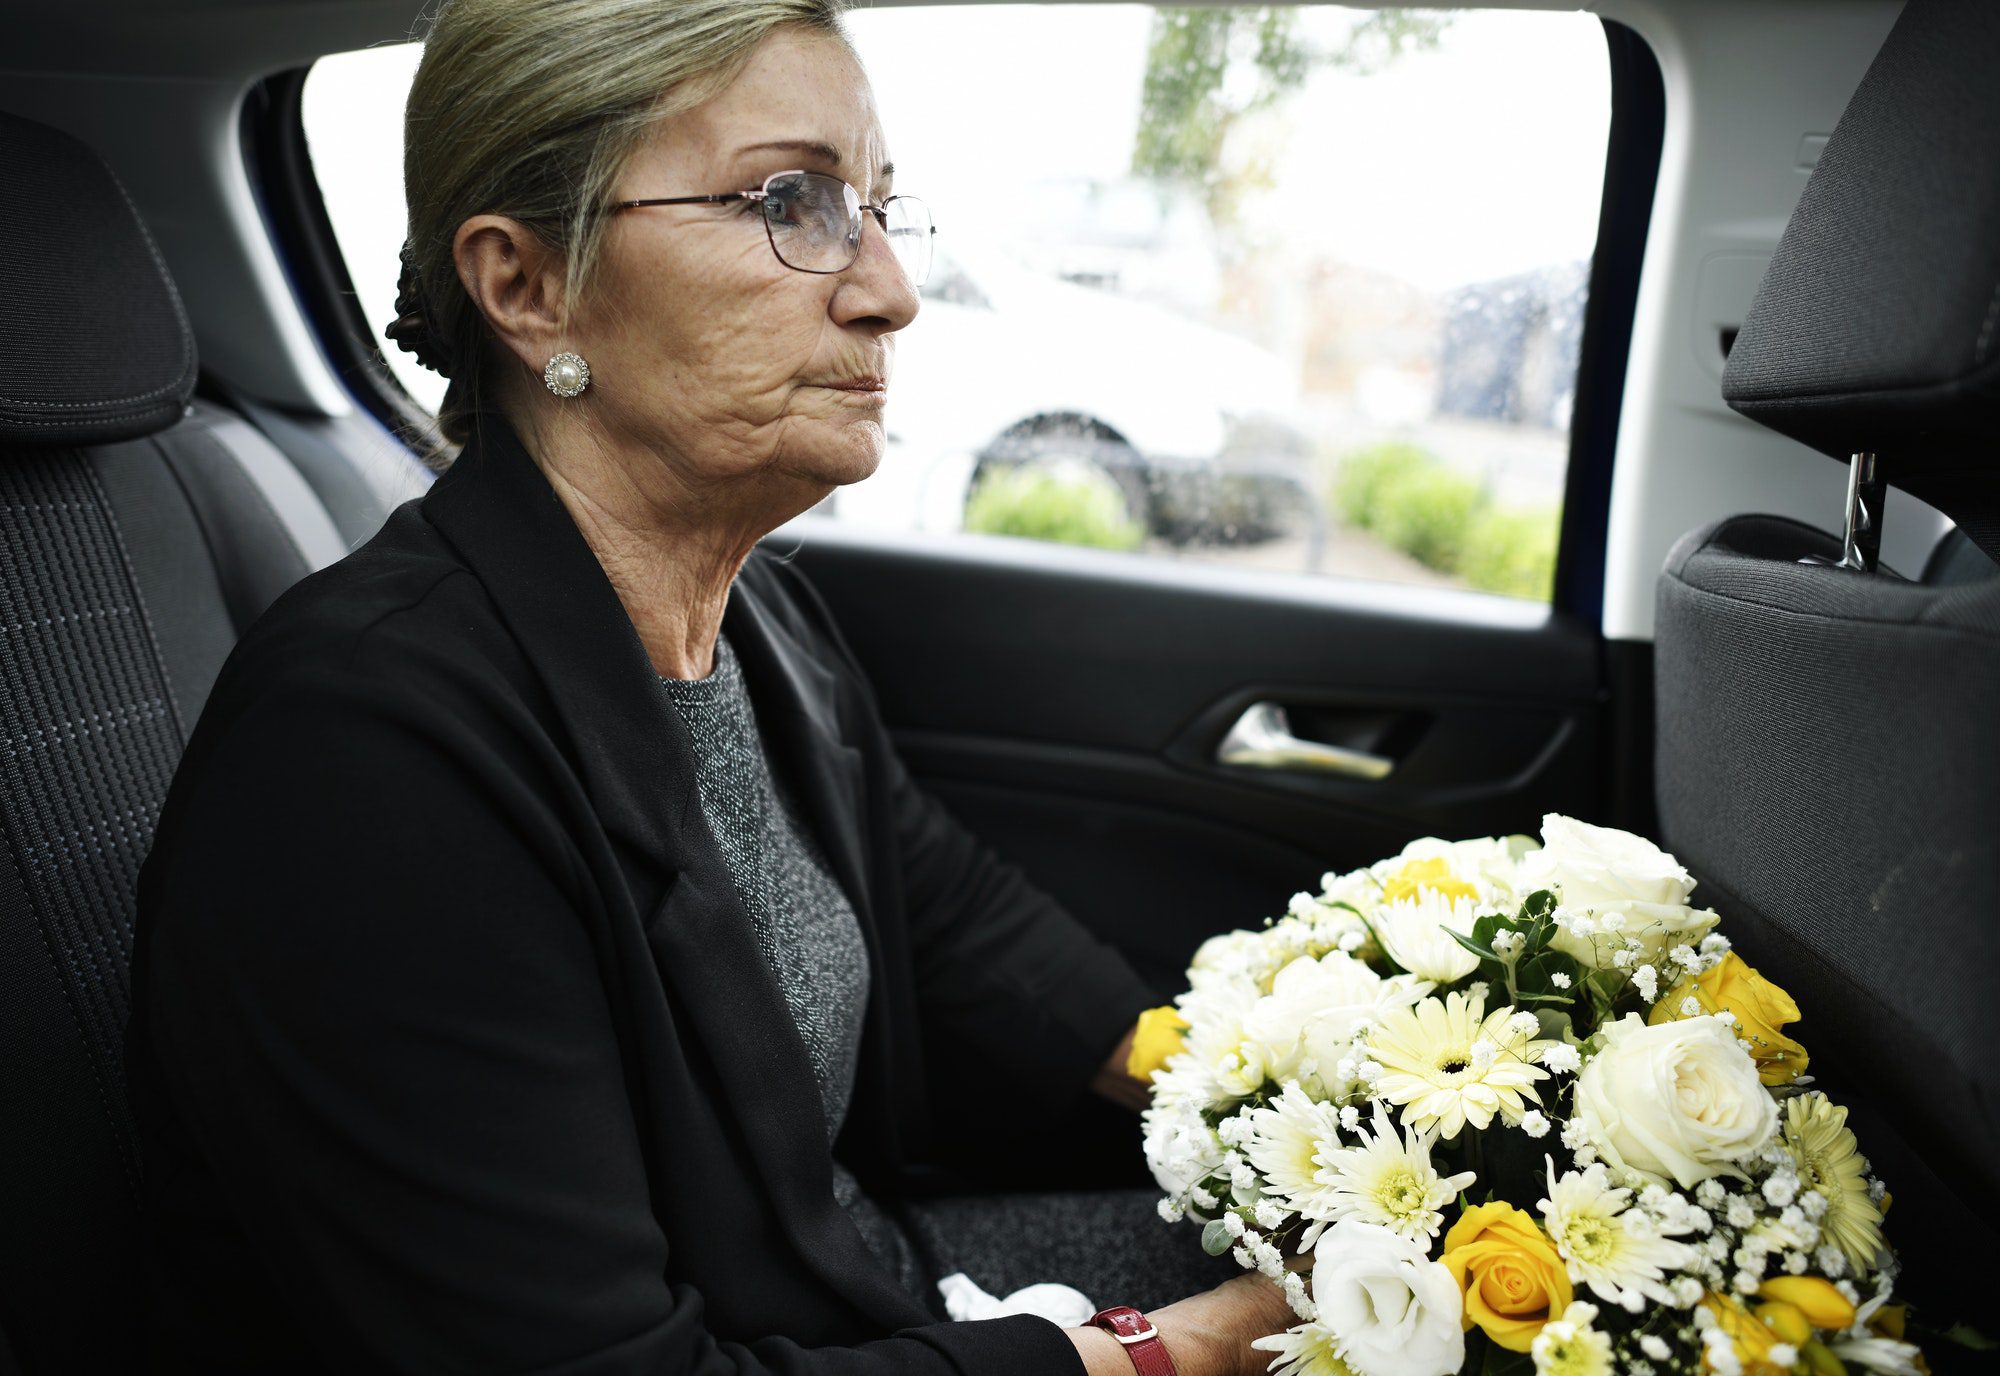 Sad widow on the way to the funeral understanding why she had Final Expense Insurance